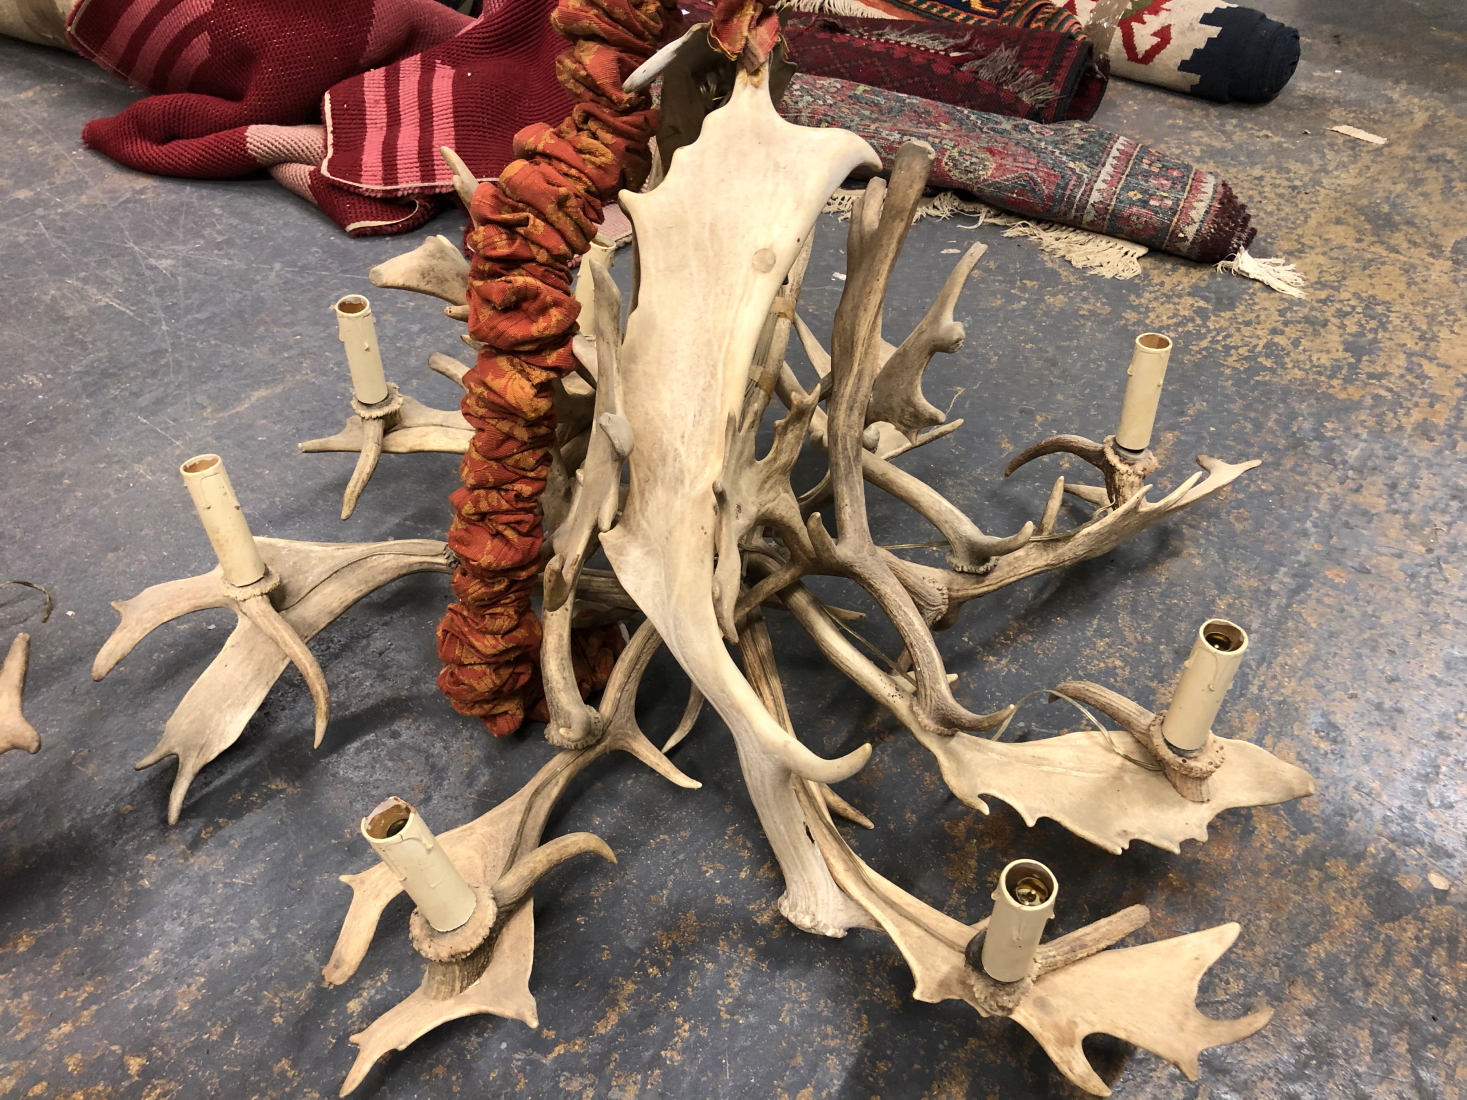 TWO LARGE ANTLER CHANDELIERS - Image 8 of 10